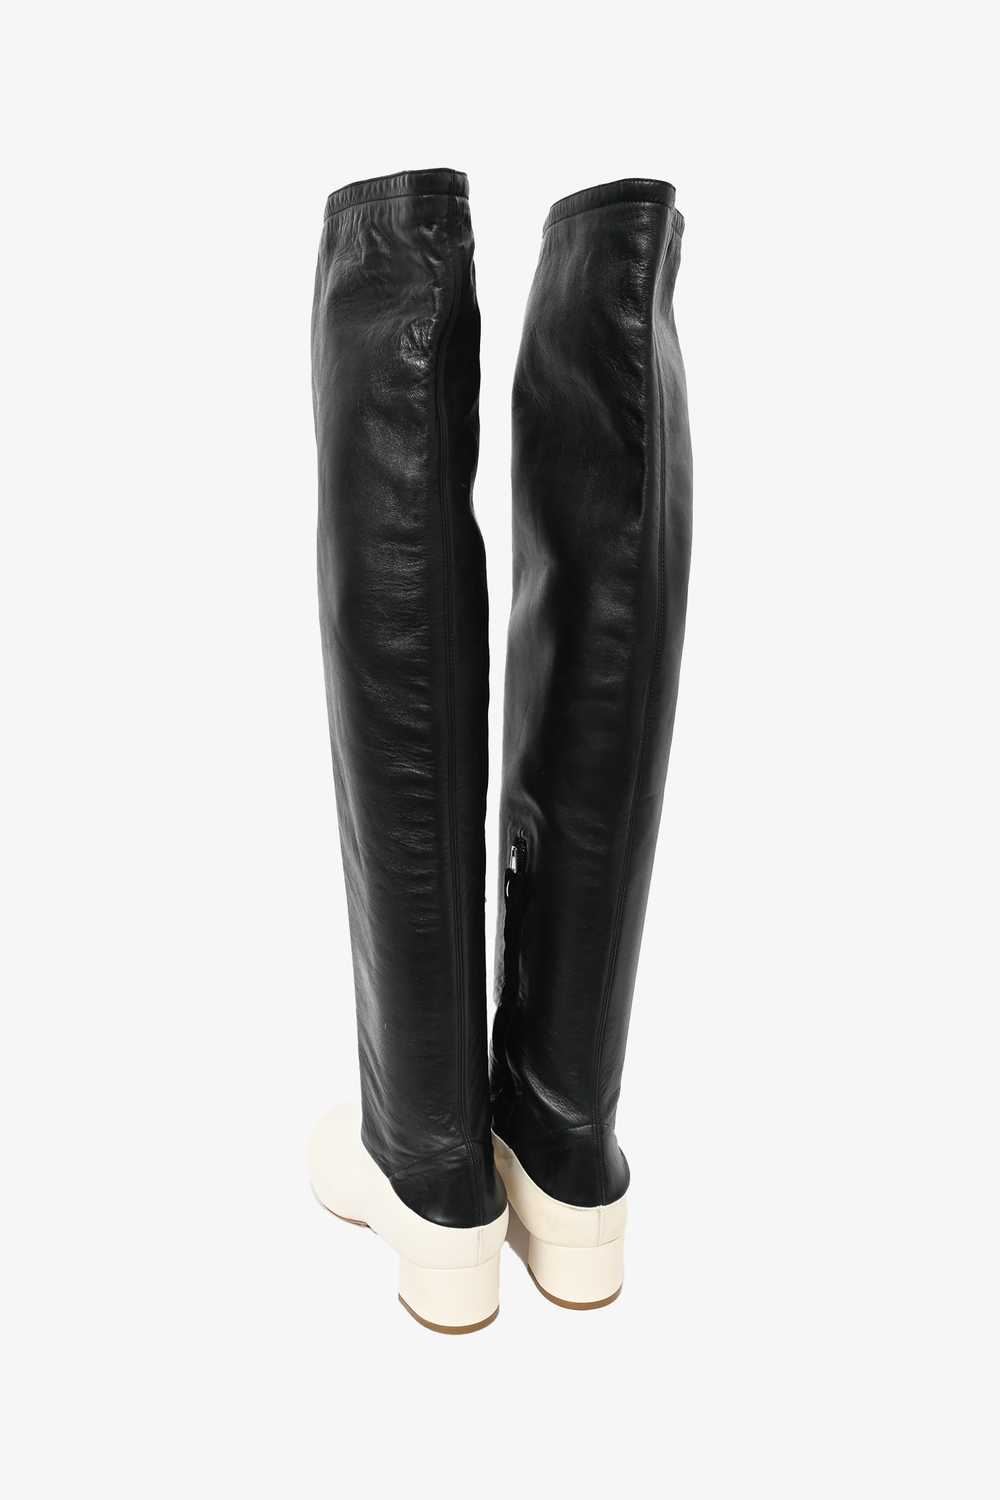 Celine Black/White Leather Knee High Boots Size 36 - image 4